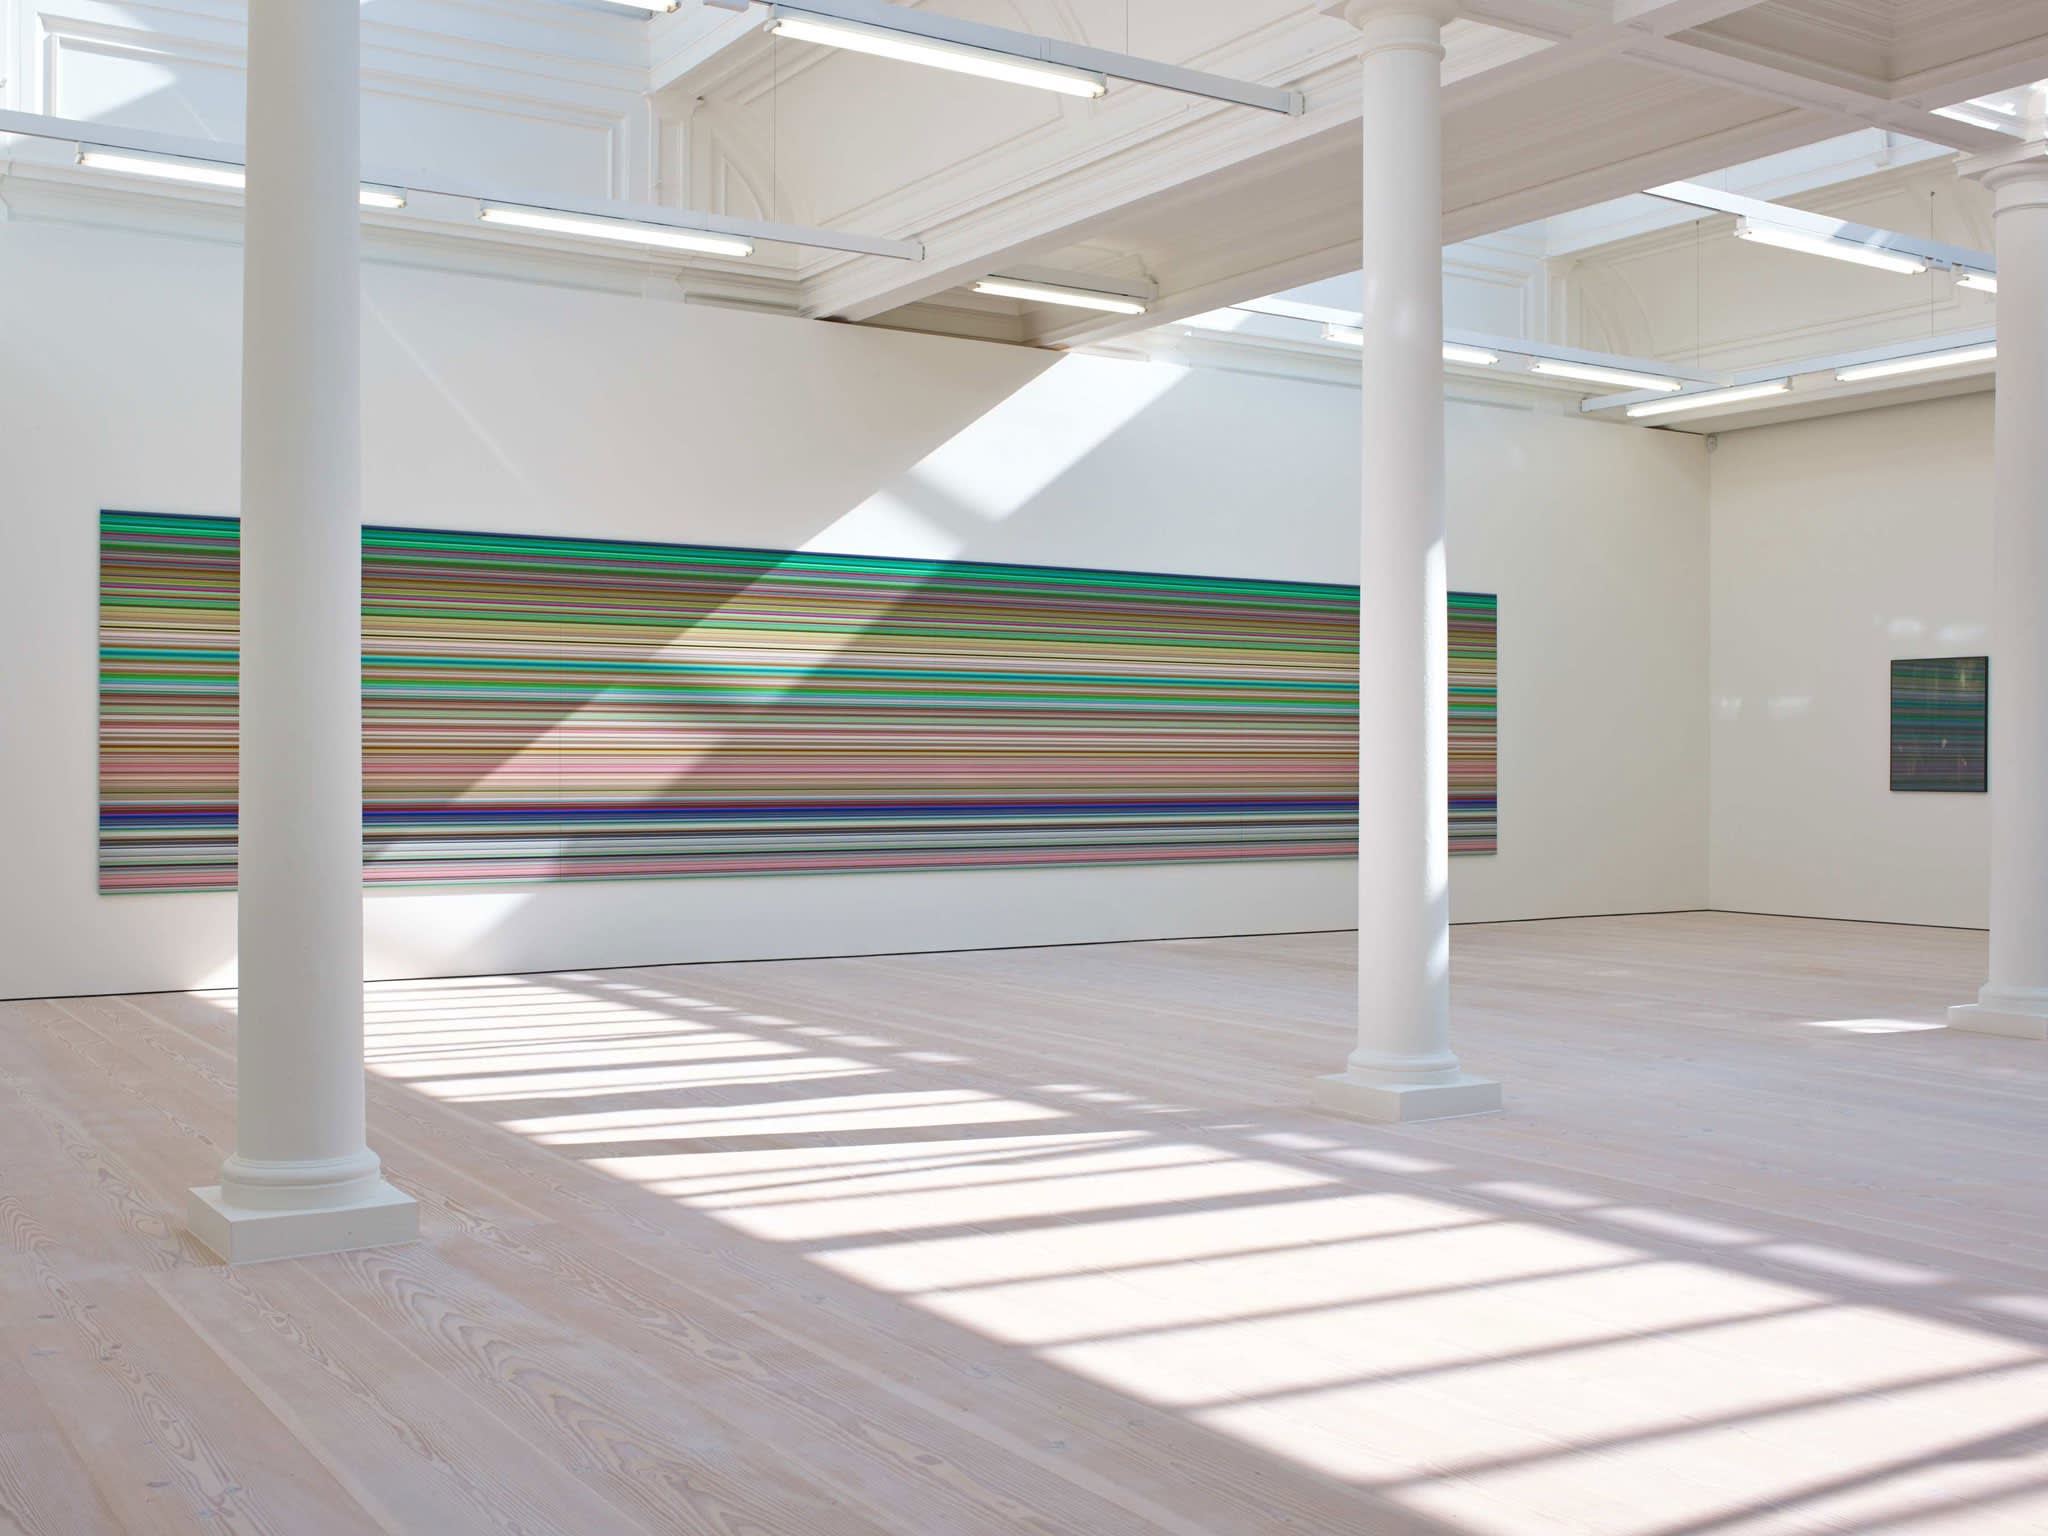 In a large white space with columns and skylights, an enormous painting hangs, light from the skylight shining on it. It is made up of hundreds of perfect horizontal strips of various colors, mostly light green in hue, with a great deal of reds and blues.